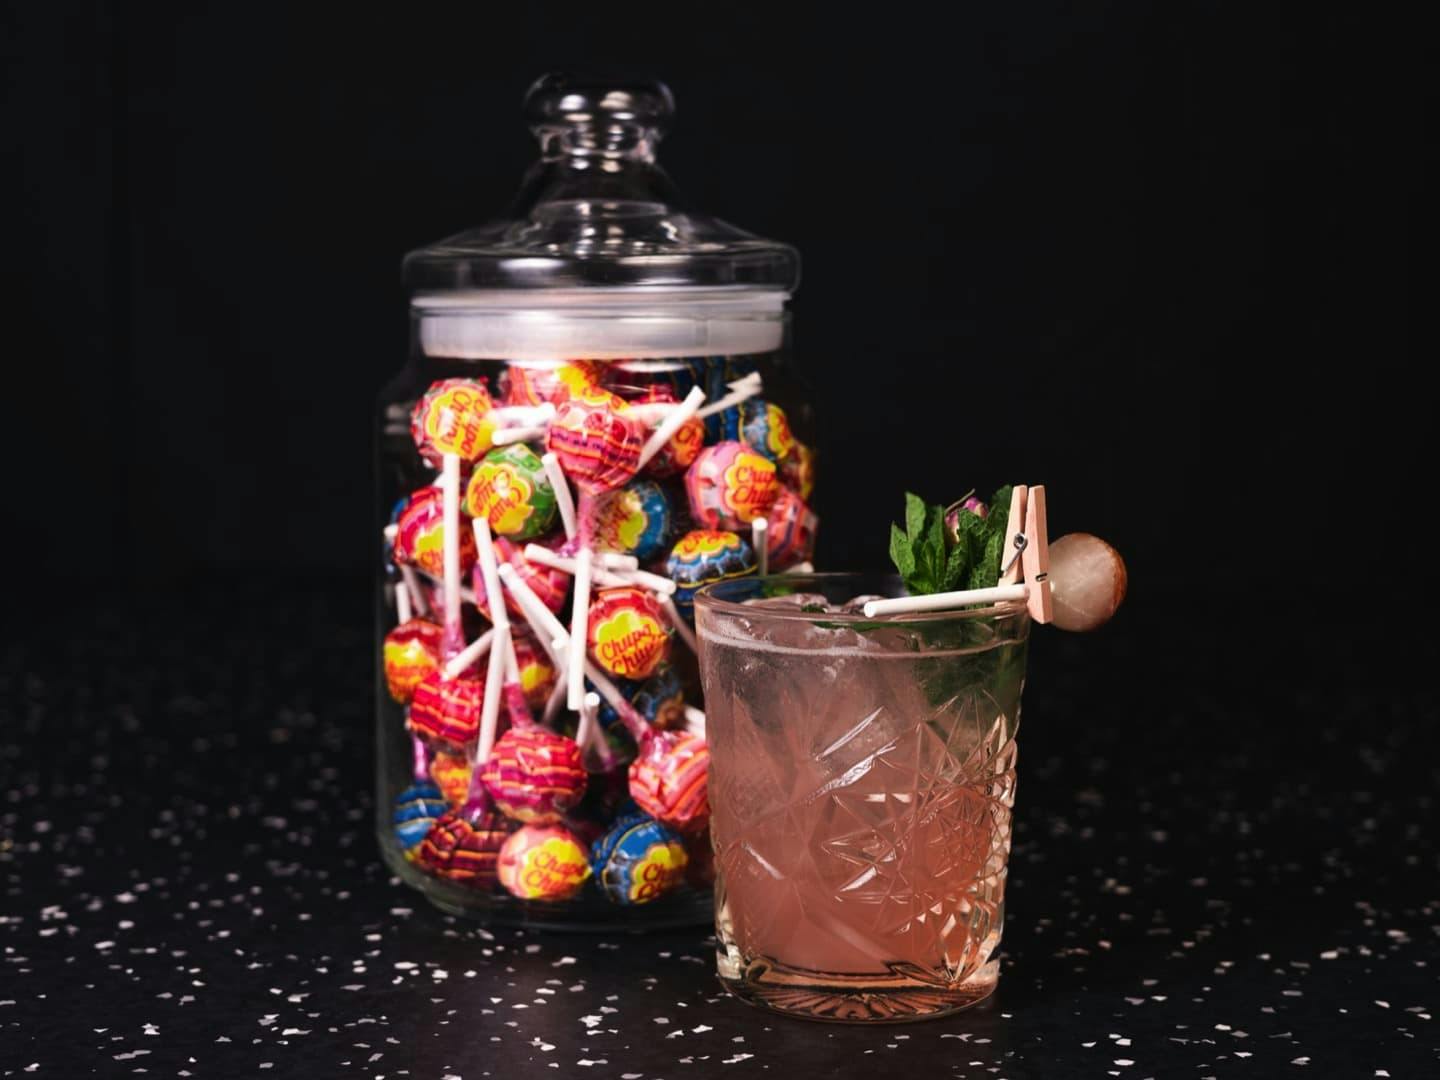 <p>Just for you....By popular demand, it's back at Hitch</p>
<p>Base: Gin, lime, homemade Chupa Chups syrup</p>